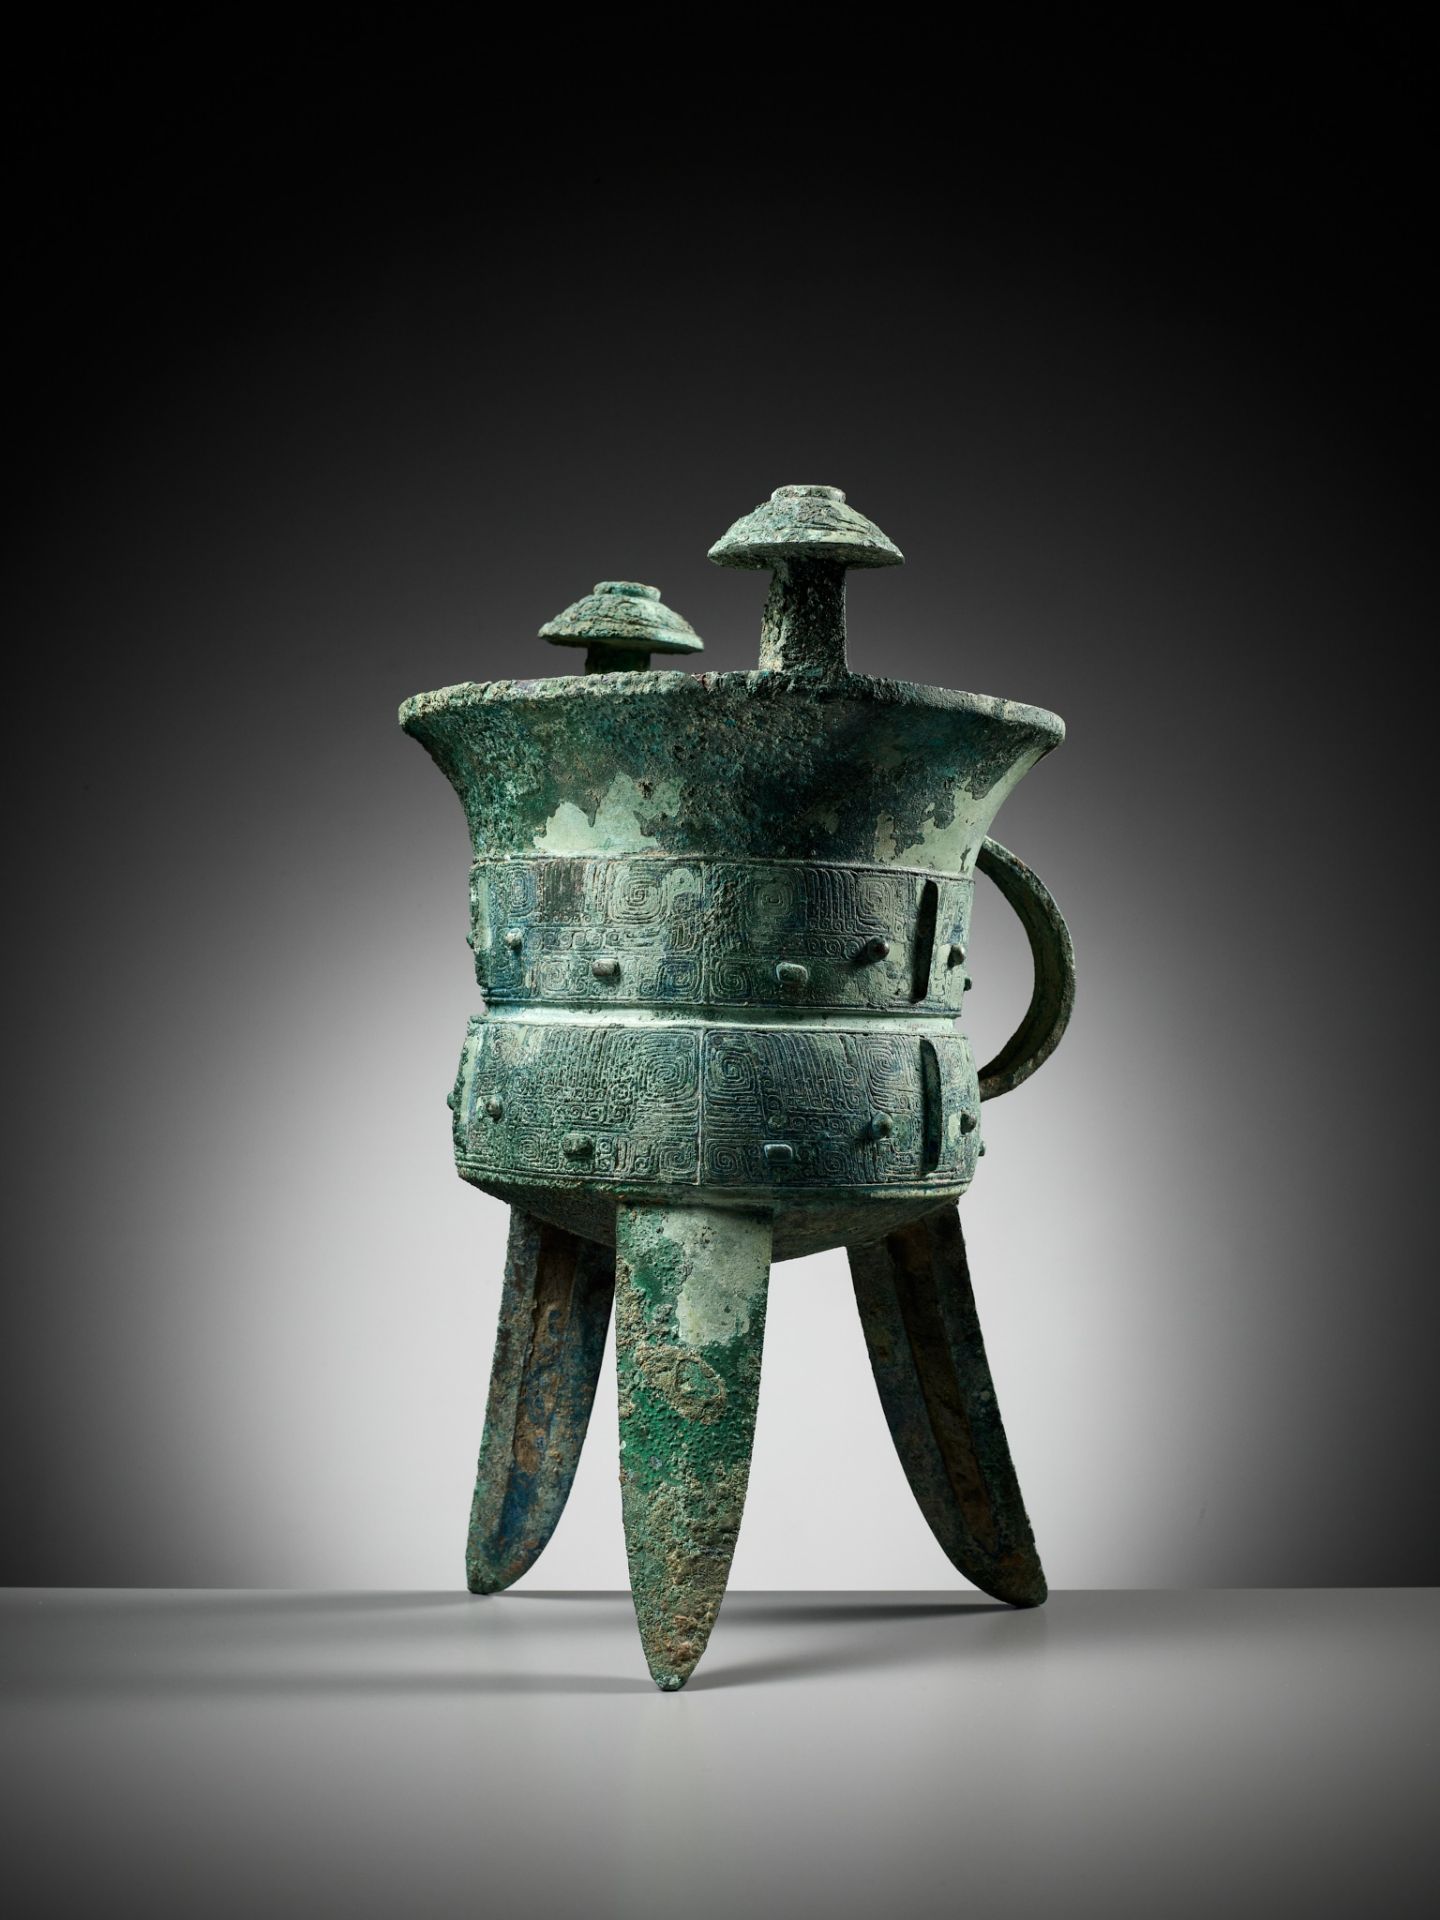 AN EXCEPTIONALLY LARGE AND MASSIVE BRONZE RITUAL TRIPOD WINE VESSEL, JIA, WITH A CLAN MARK, SHANG - Image 14 of 29